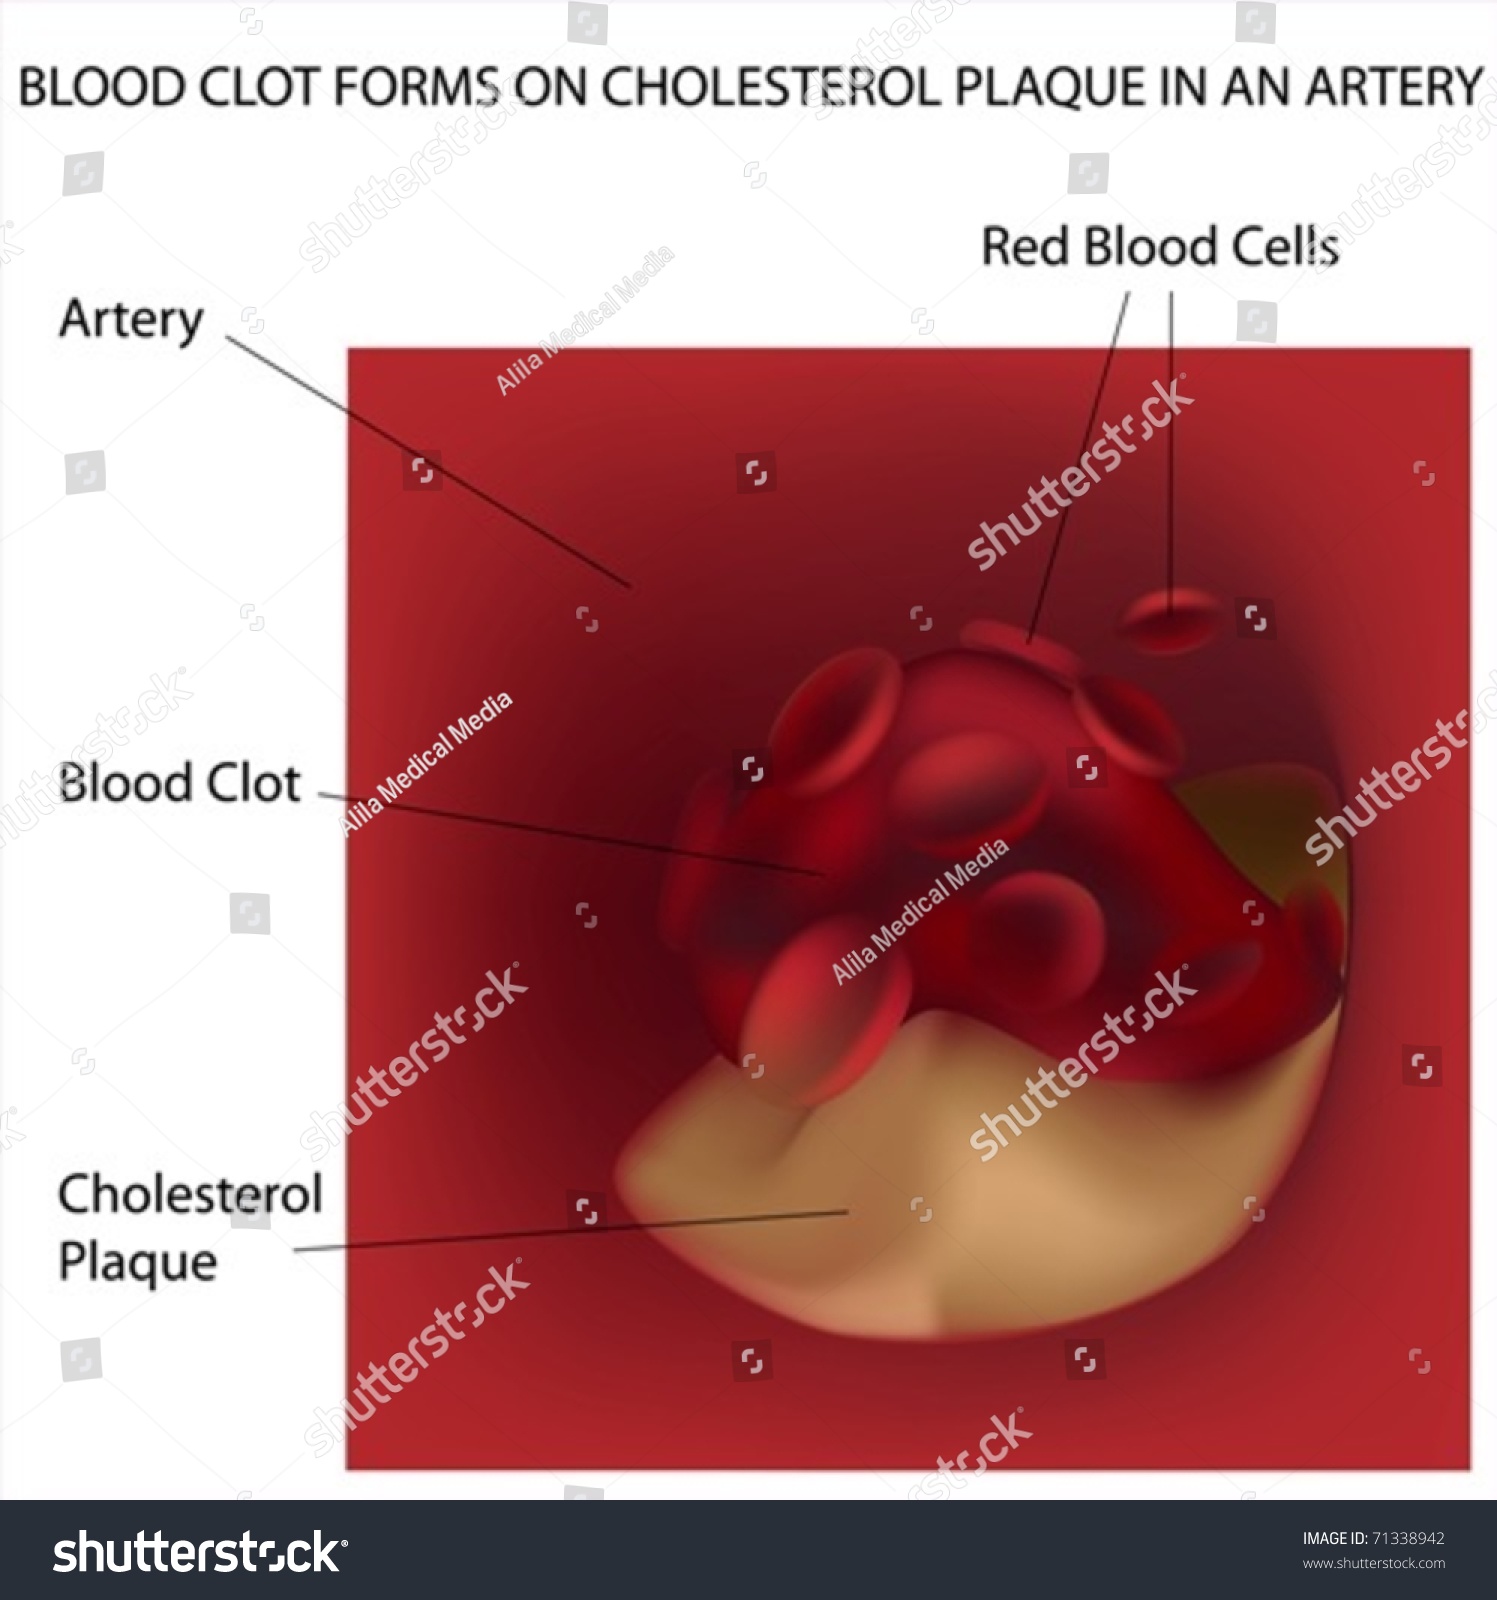 Blood Clot Forms On Cholesterol Plaque In Artery Stock Vector ...